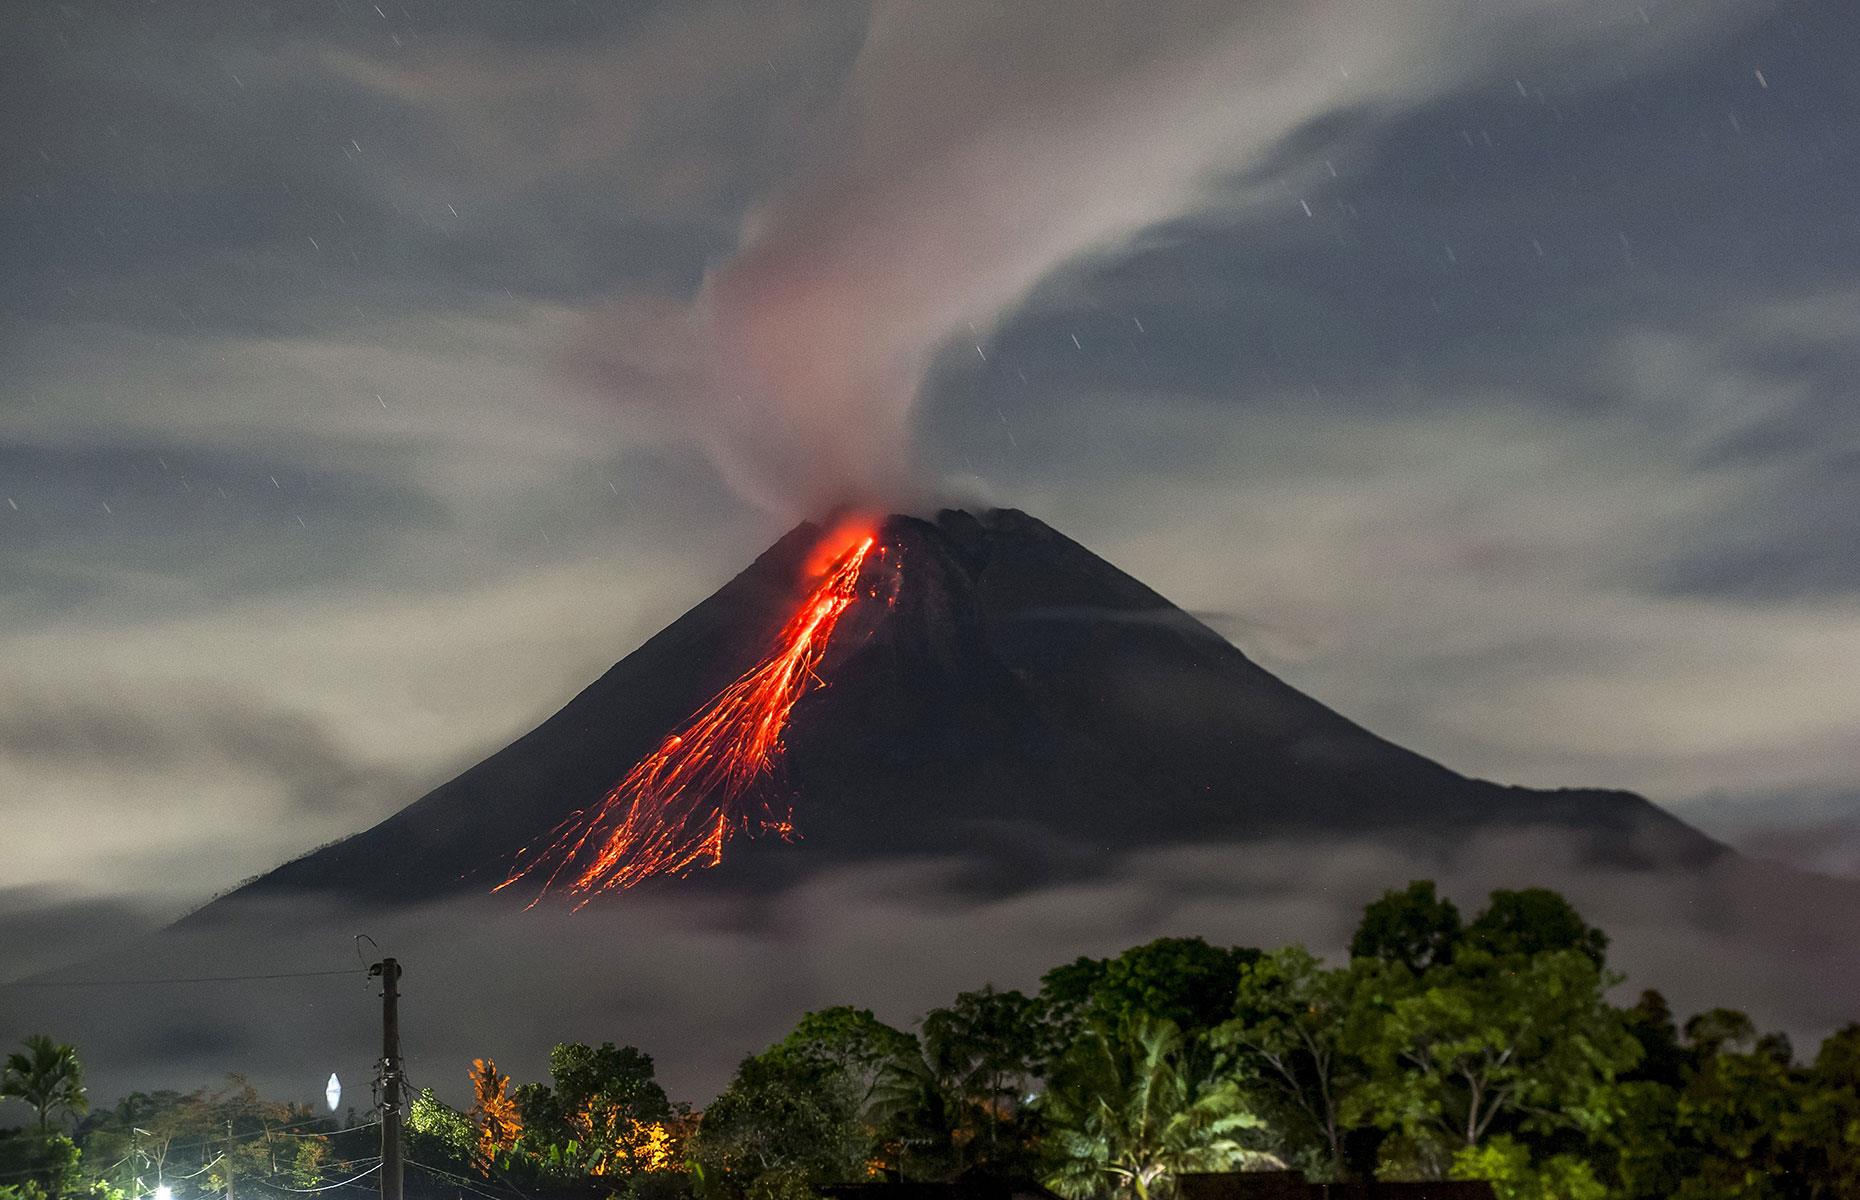 <p>In August 2021, Mount Merapi saw <a href="https://www.nbcnews.com/news/world/lava-streams-indonesia-s-mount-merapi-new-eruption-n1276886">its biggest eruption</a> in months. Lava flows reached more than two miles (3.2km) down the mountain and hot ash was spewed 2,000 feet (610m) into the sky. This photo from mid-September 2021 shows it still sending fiery lava down its slopes.</p>